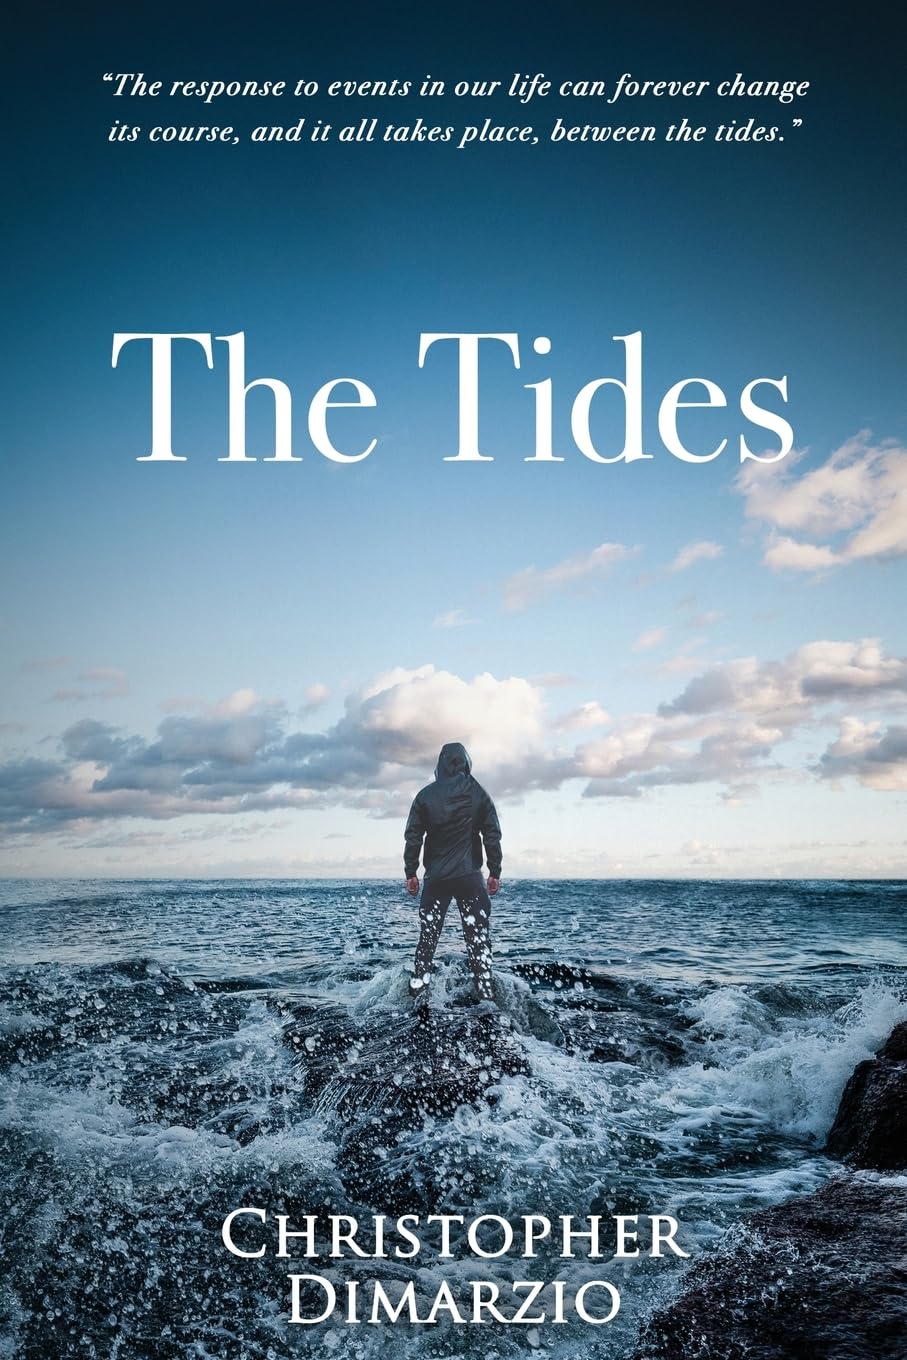 New novel "The Tides" by Christopher Dimarzio is released, the story of a portrait artist, his subjects, and navigating the nuances of their lives to find common humanity